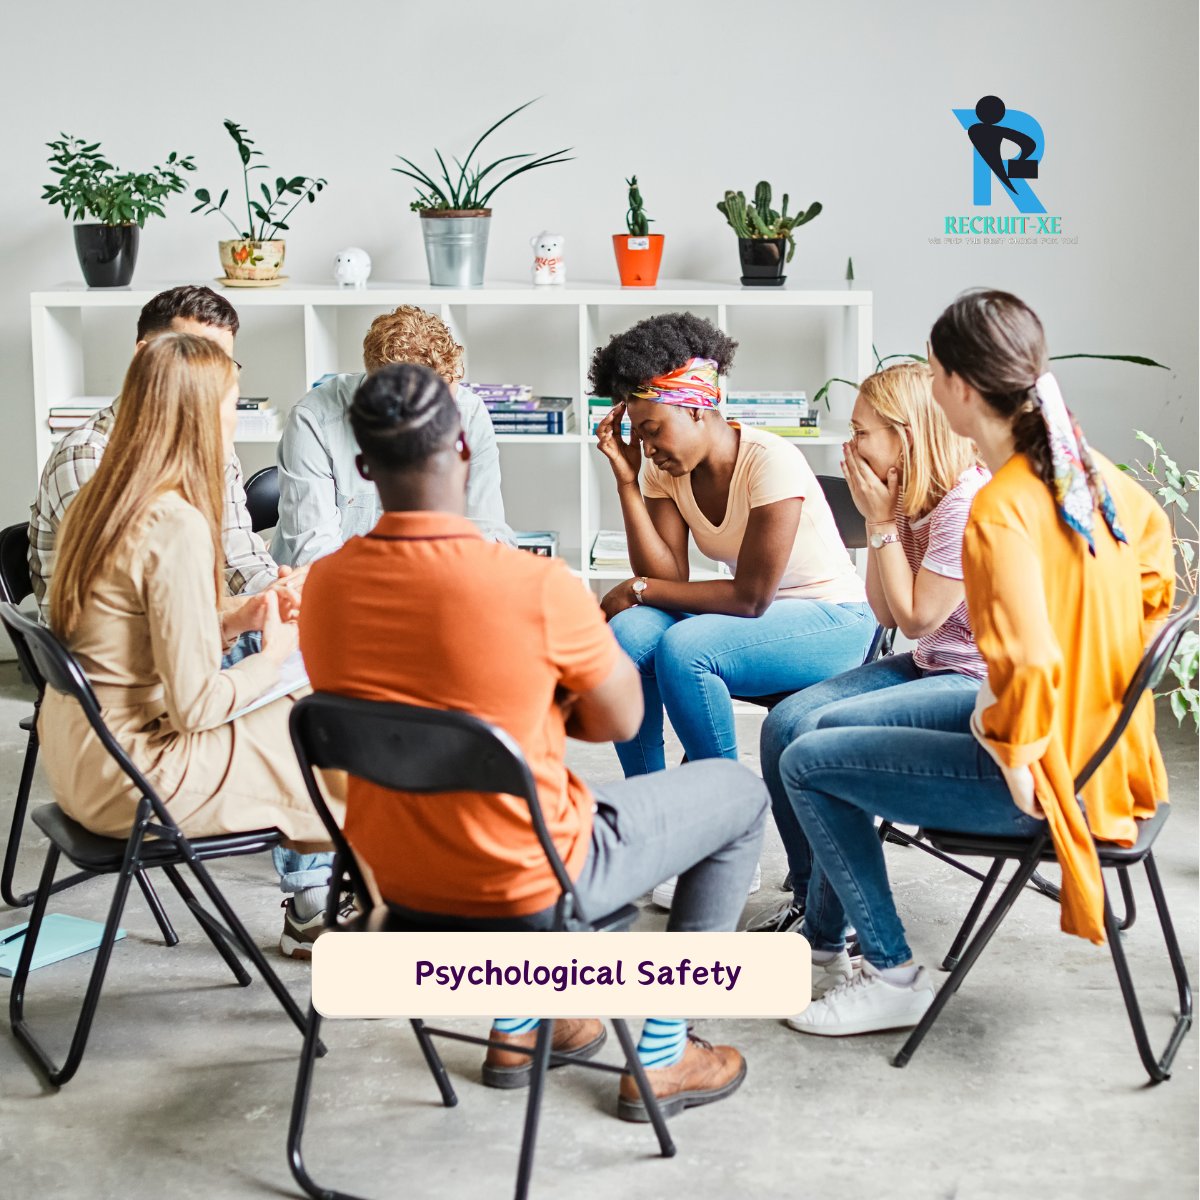 Creating a psychologically safe environment is key to fostering open communication, encouraging risk-taking, and driving innovation within teams and organizations.
#PsychologicalSafety #InnovationCulture #TeamCollaboration #OpenCommunication #CreativeFreedom